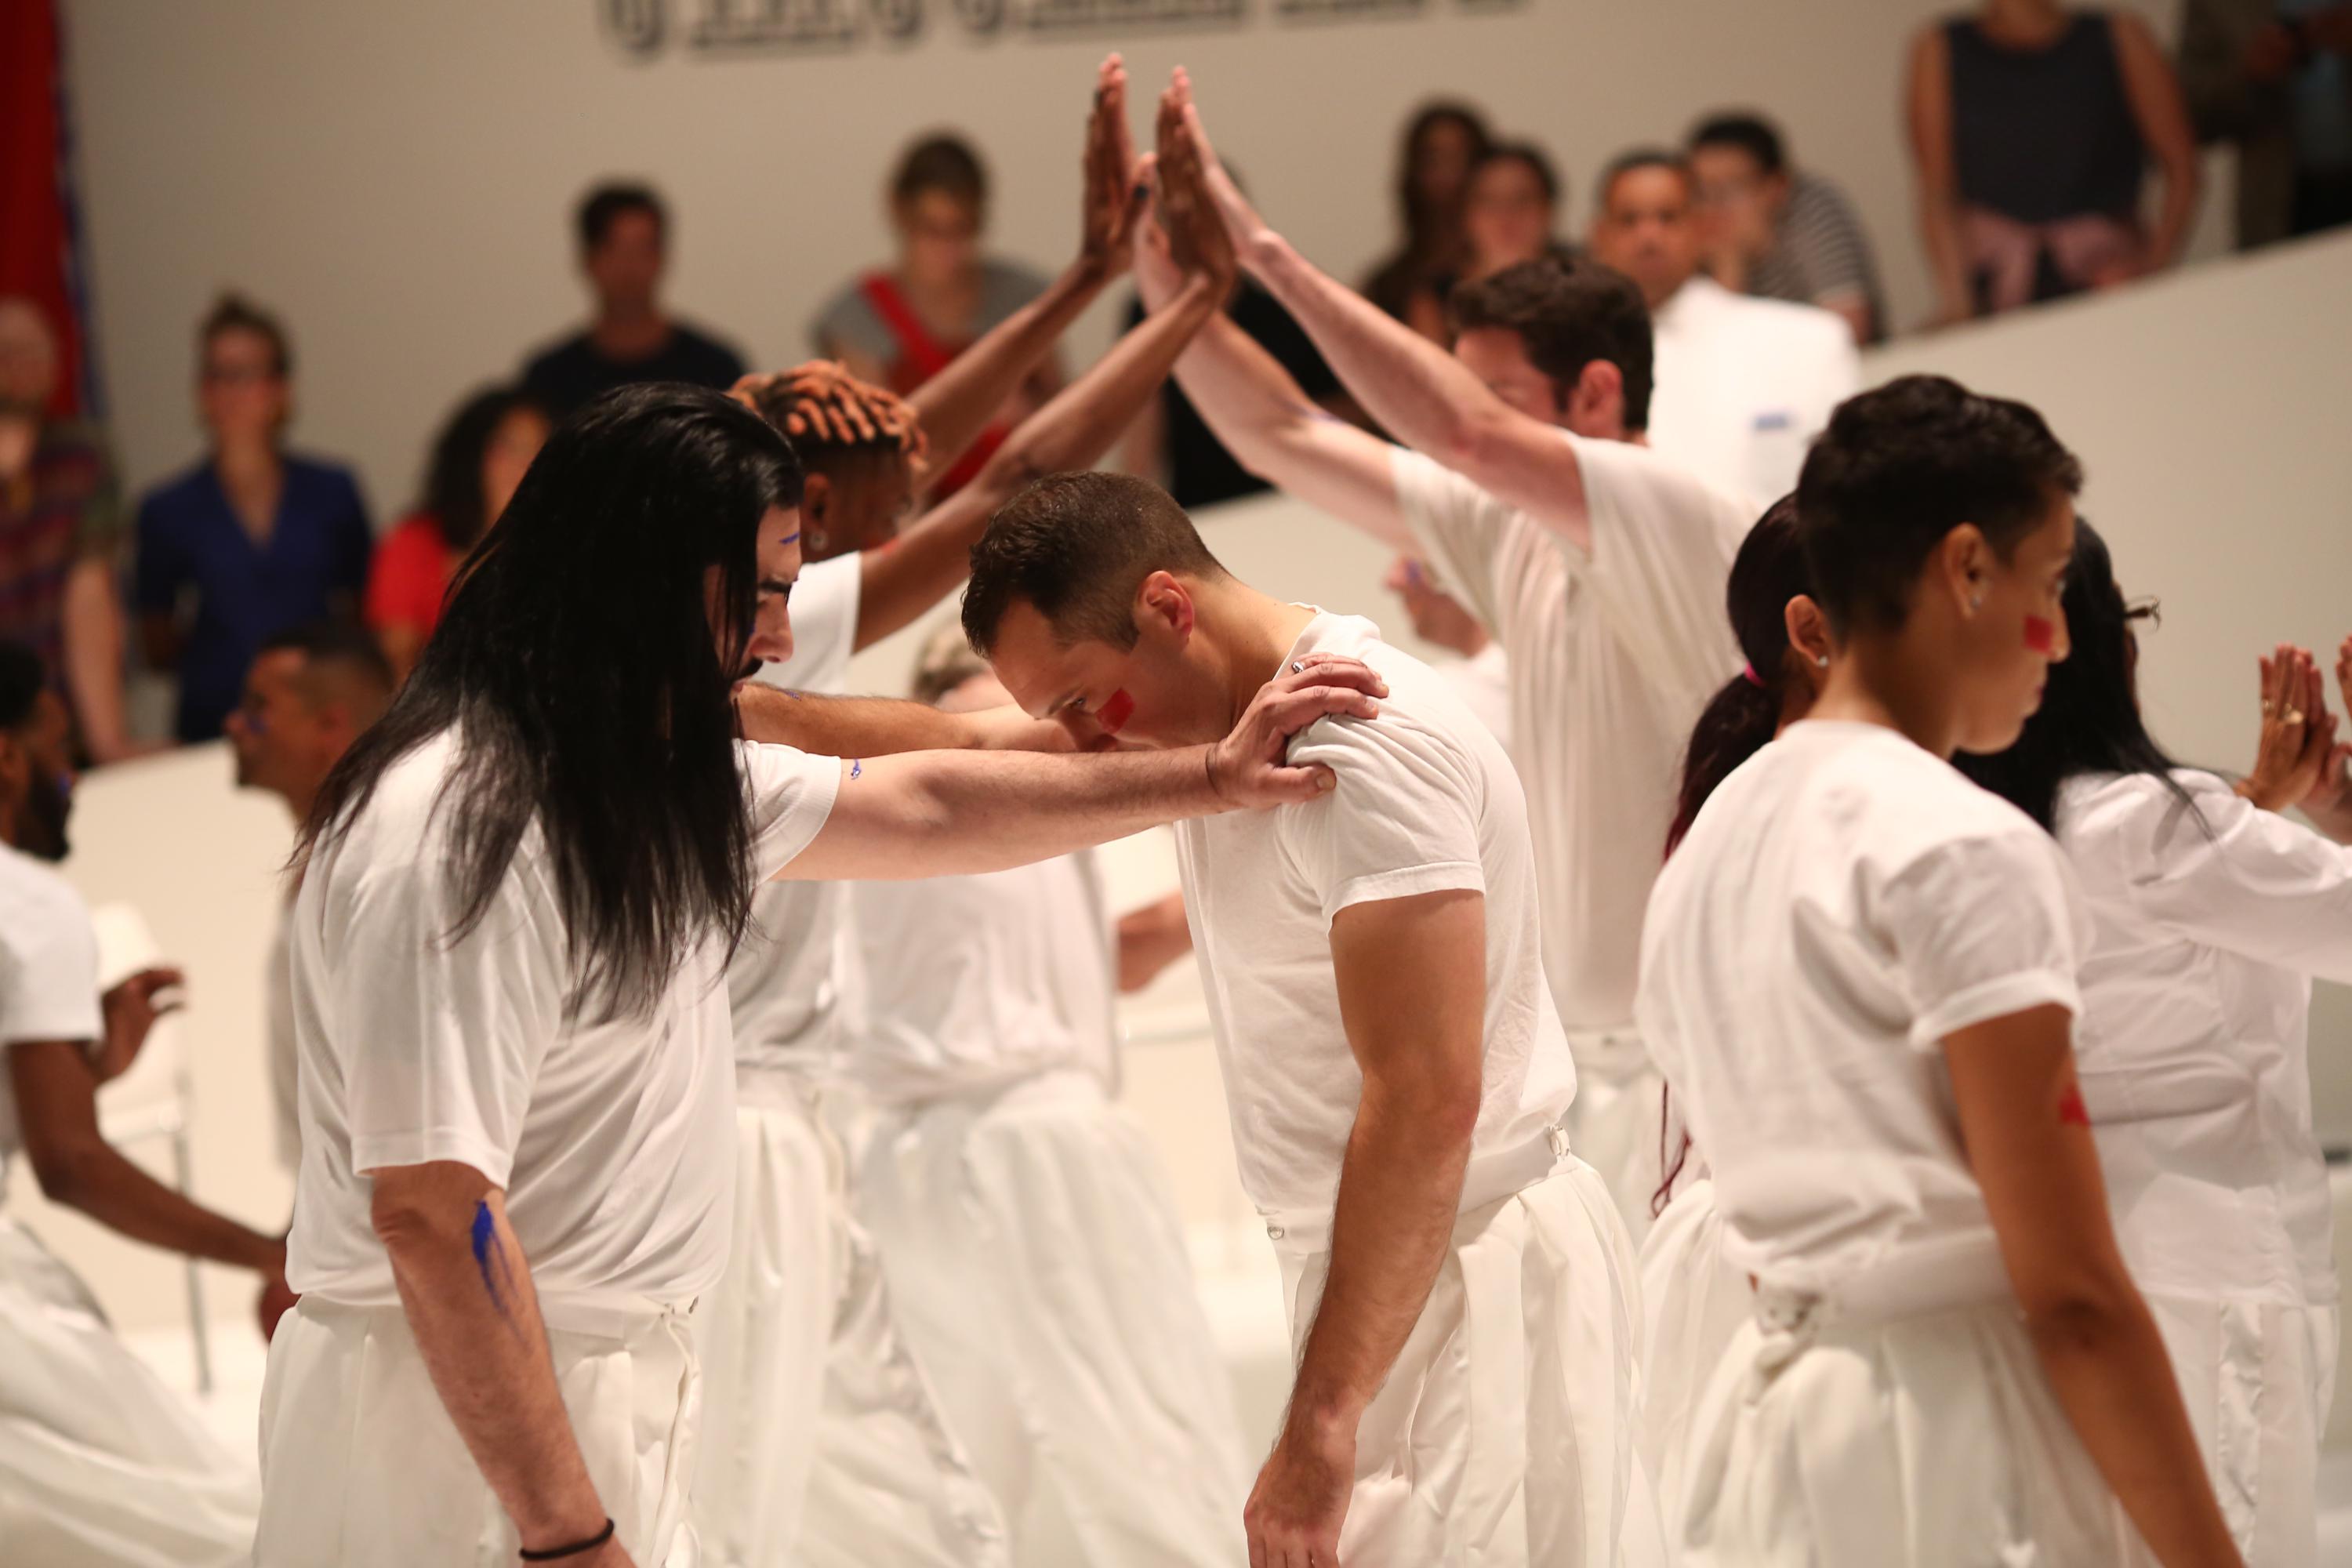 Primitive Games - performance, 1 hr. at Guggenheim Museum, New York, NY, 6/21/18. Photo by Paula Court